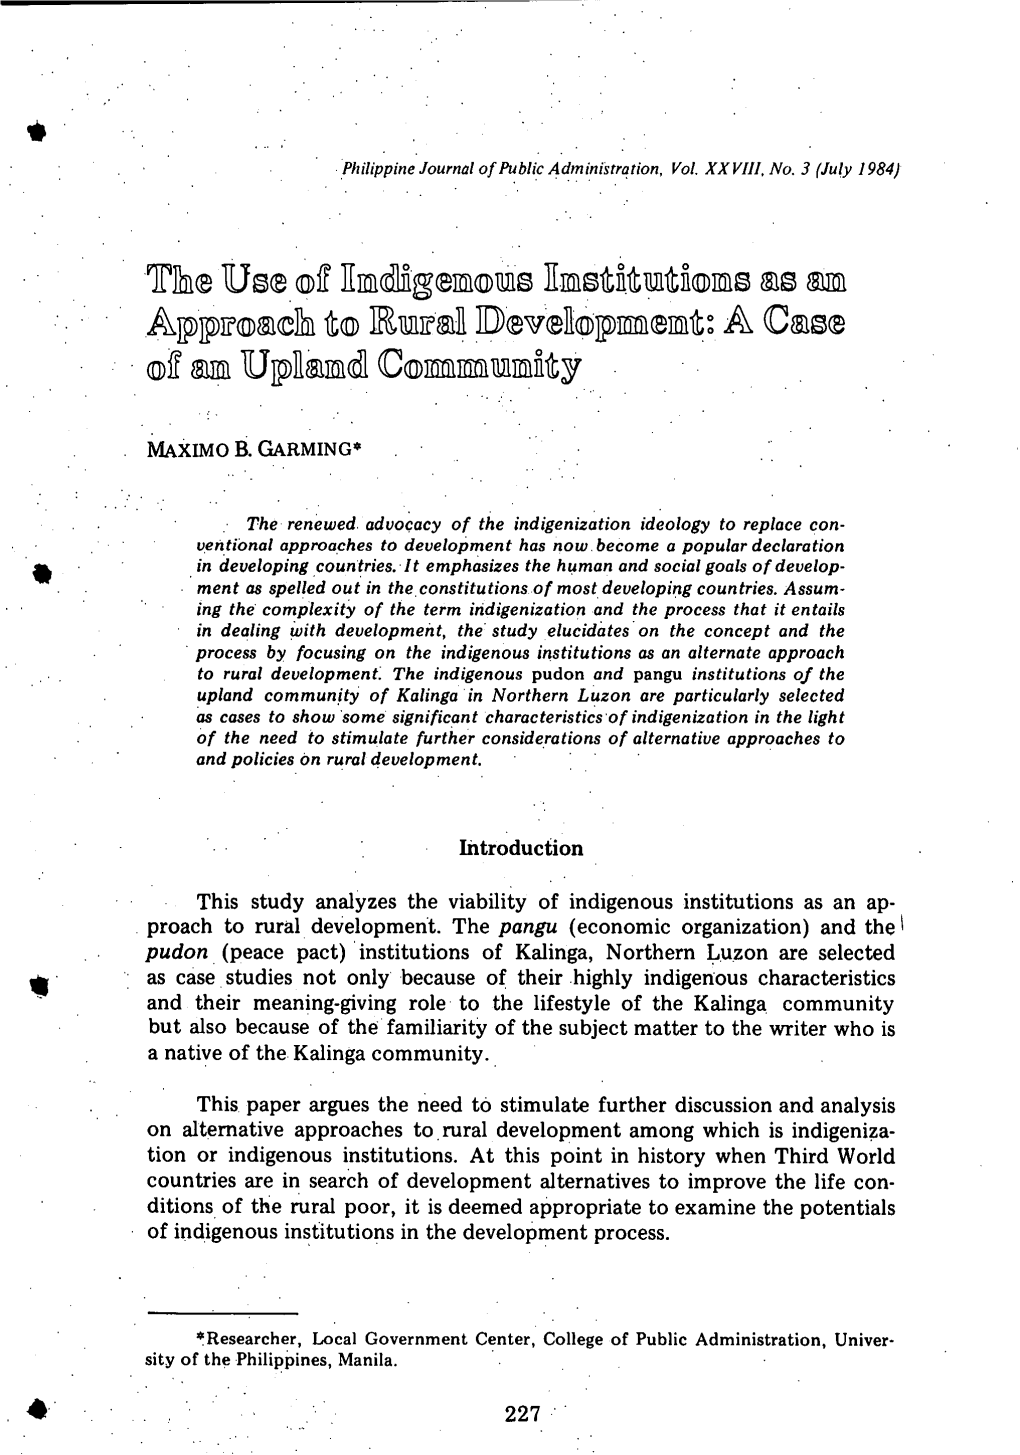 07 the Use of Indigenous Institutions